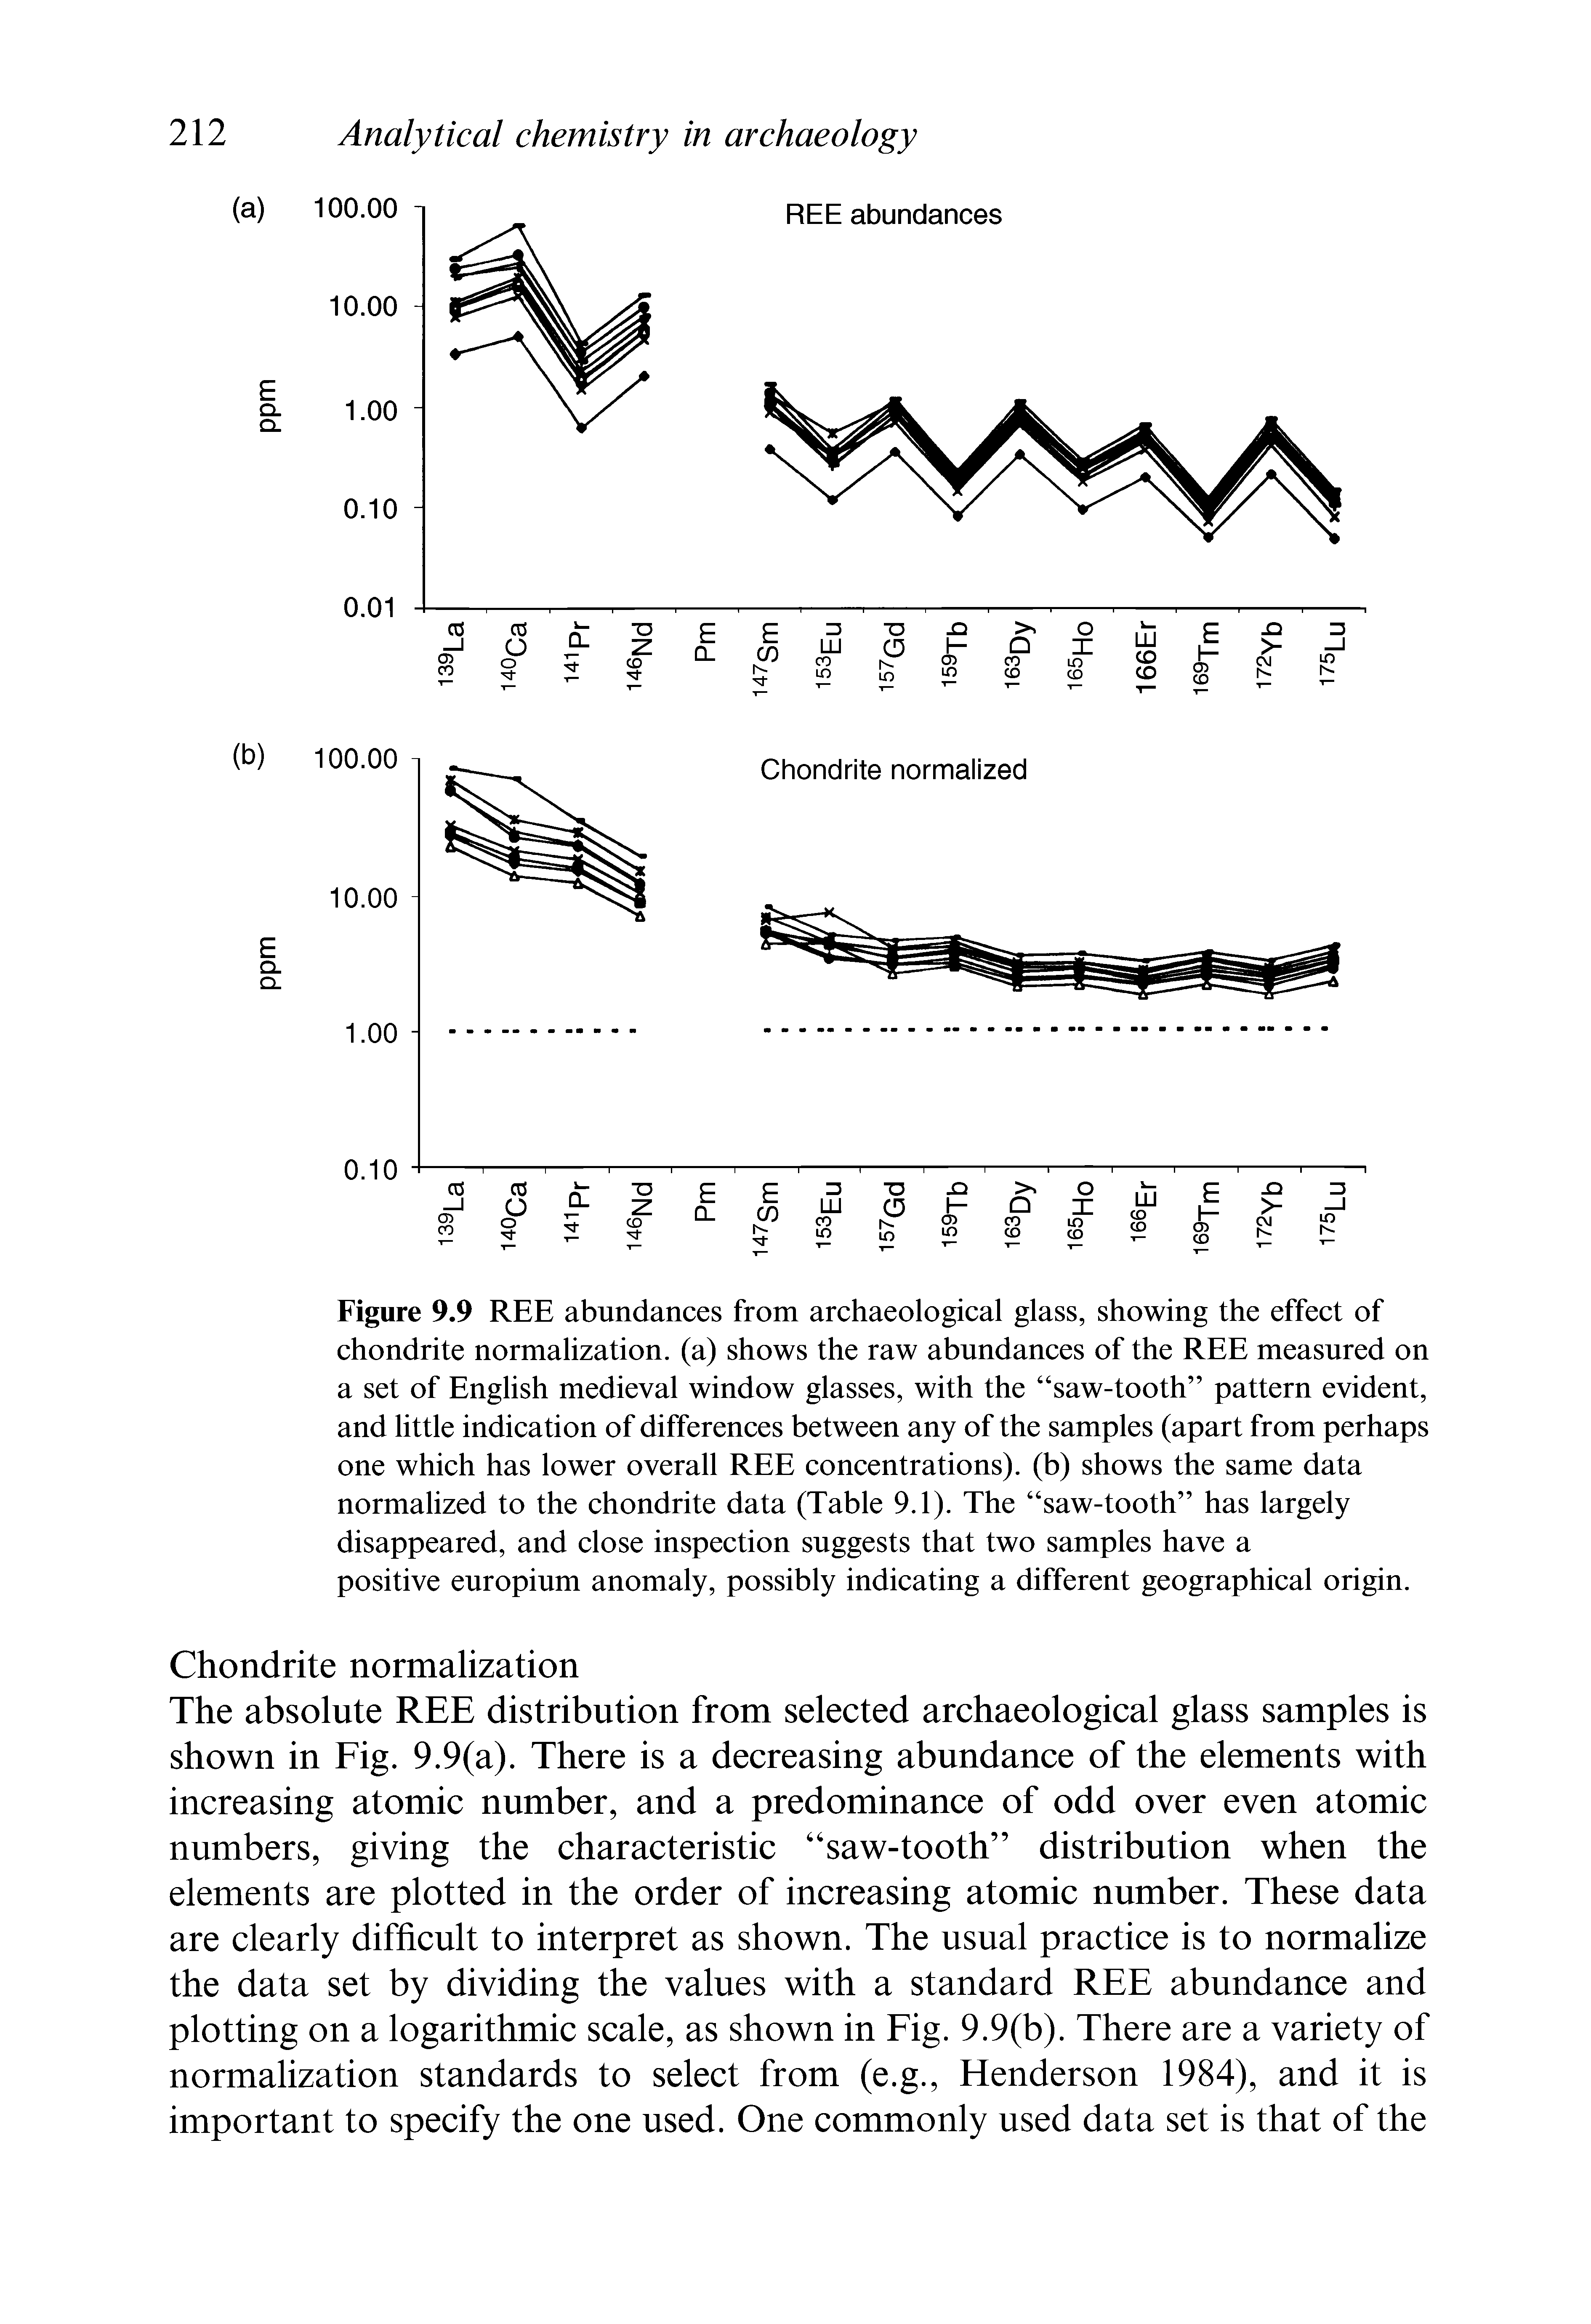 Figure 9.9 REE abundances from archaeological glass, showing the effect of chondrite normalization, (a) shows the raw abundances of the REE measured on a set of English medieval window glasses, with the saw-tooth pattern evident, and little indication of differences between any of the samples (apart from perhaps one which has lower overall REE concentrations), (b) shows the same data normalized to the chondrite data (Table 9.1). The saw-tooth has largely disappeared, and close inspection suggests that two samples have a positive europium anomaly, possibly indicating a different geographical origin.